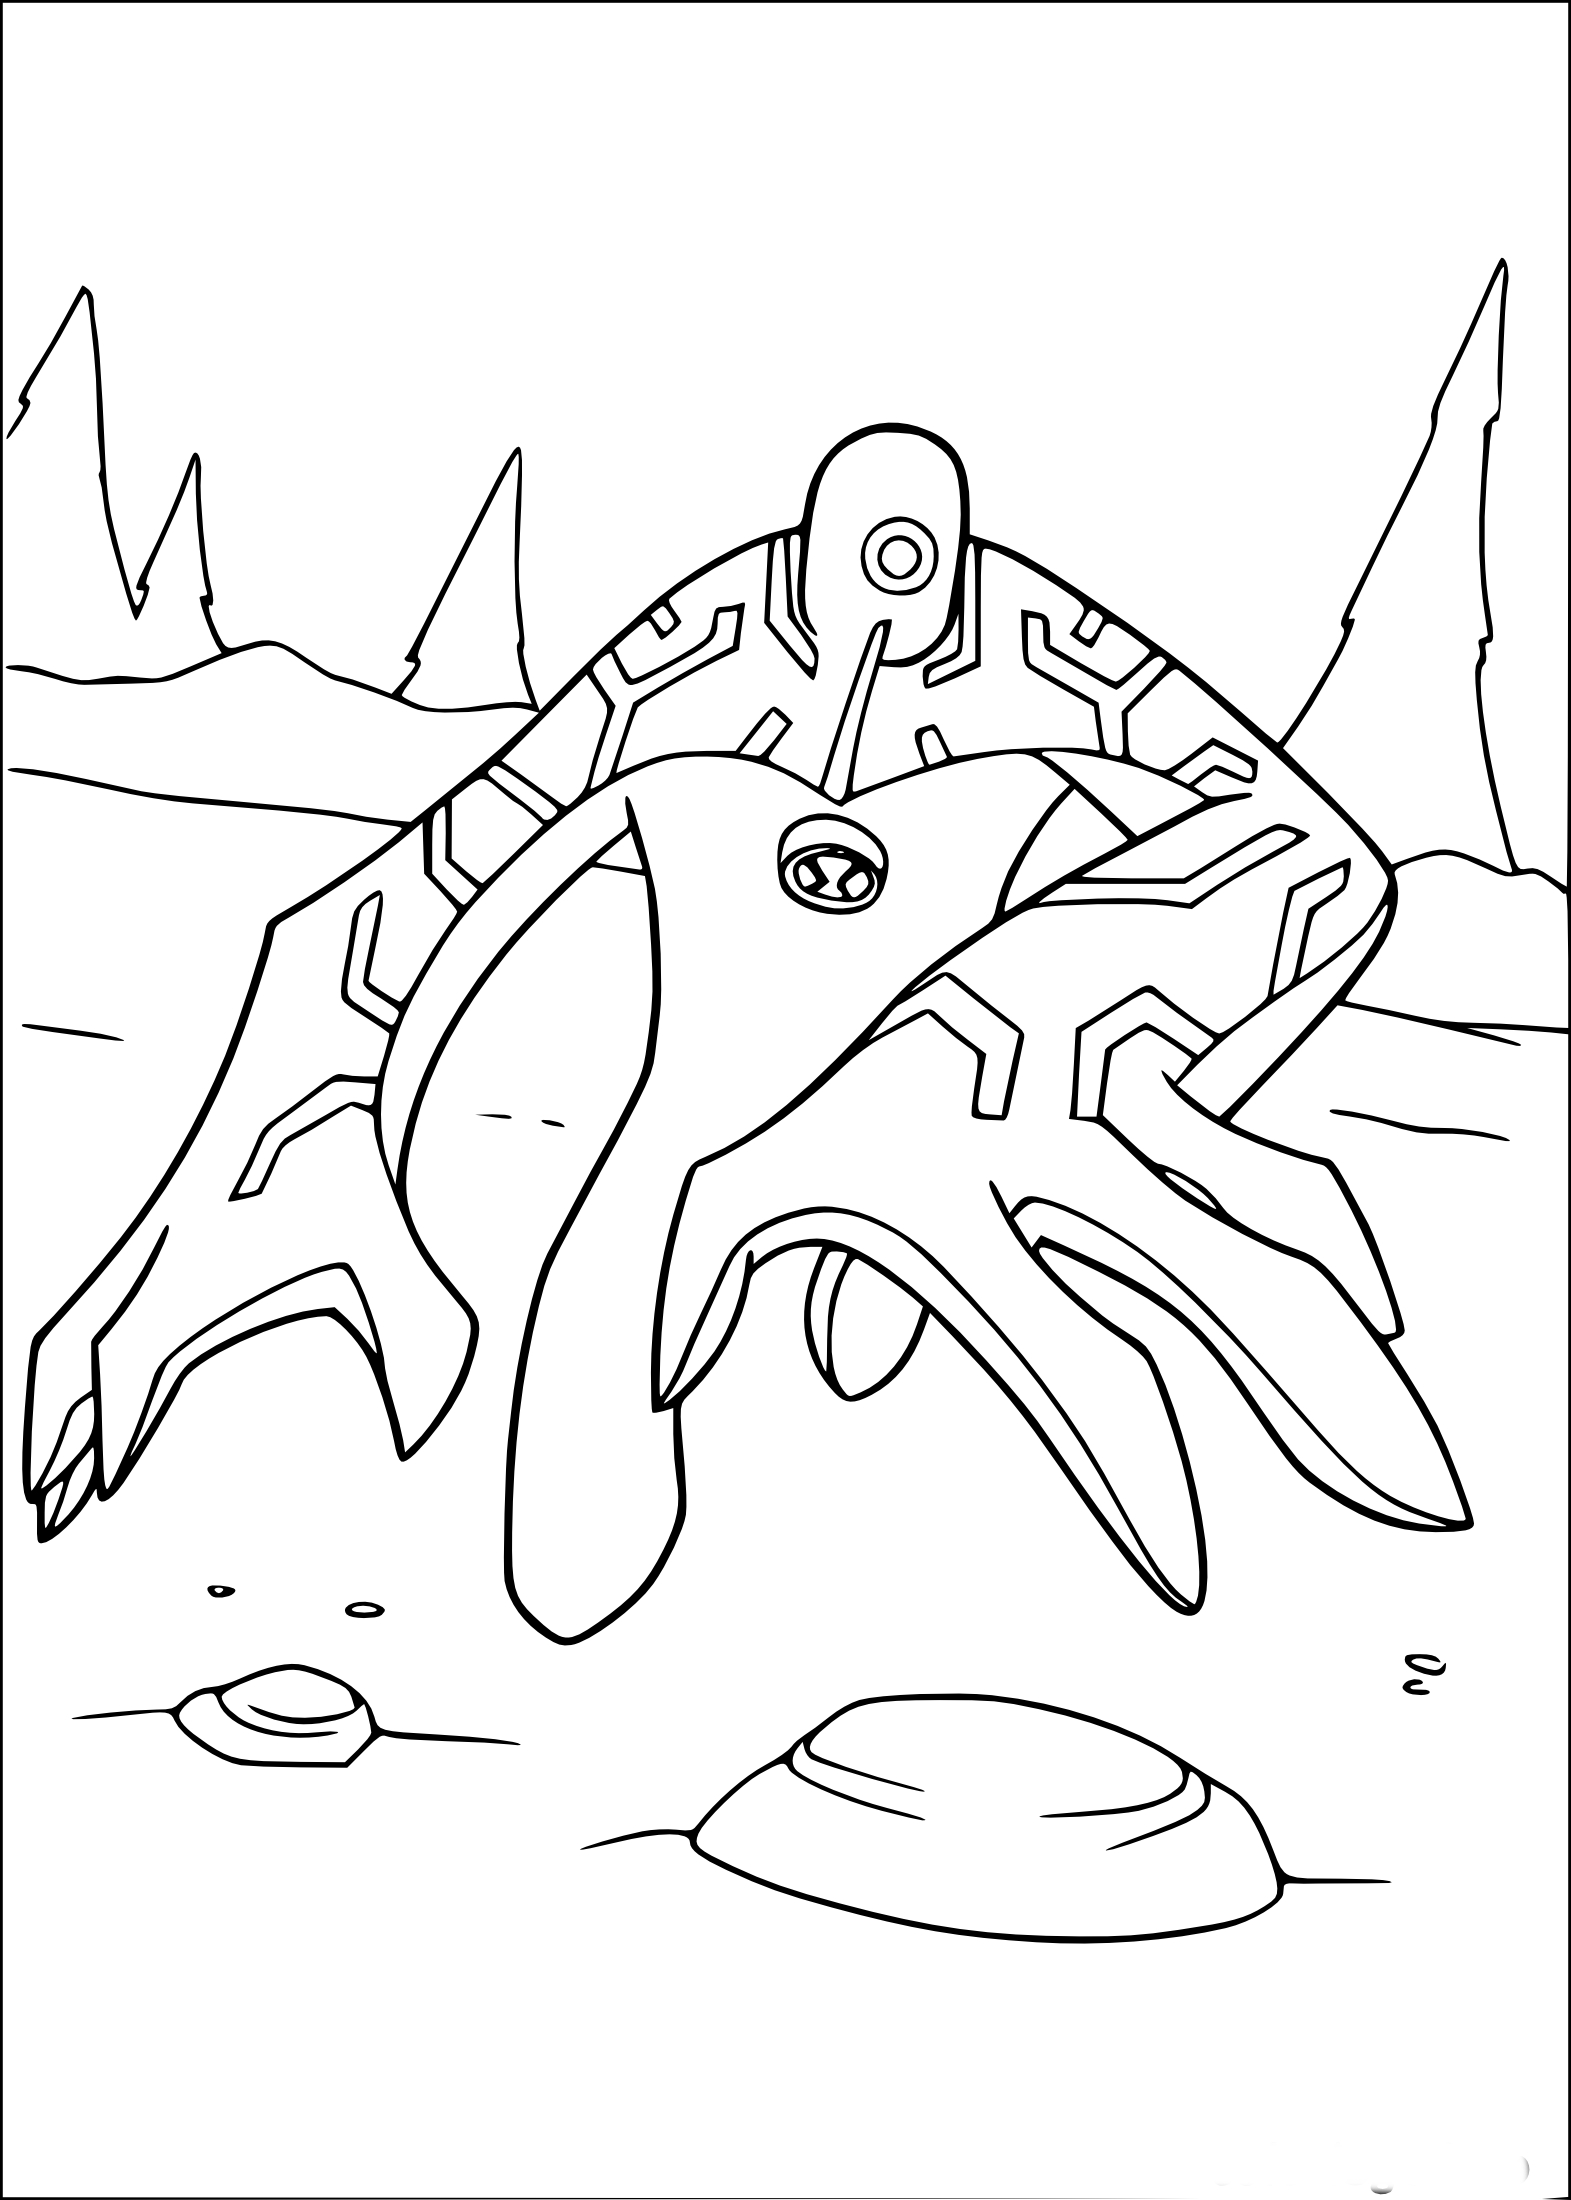 Ben 10 drawing and coloring page